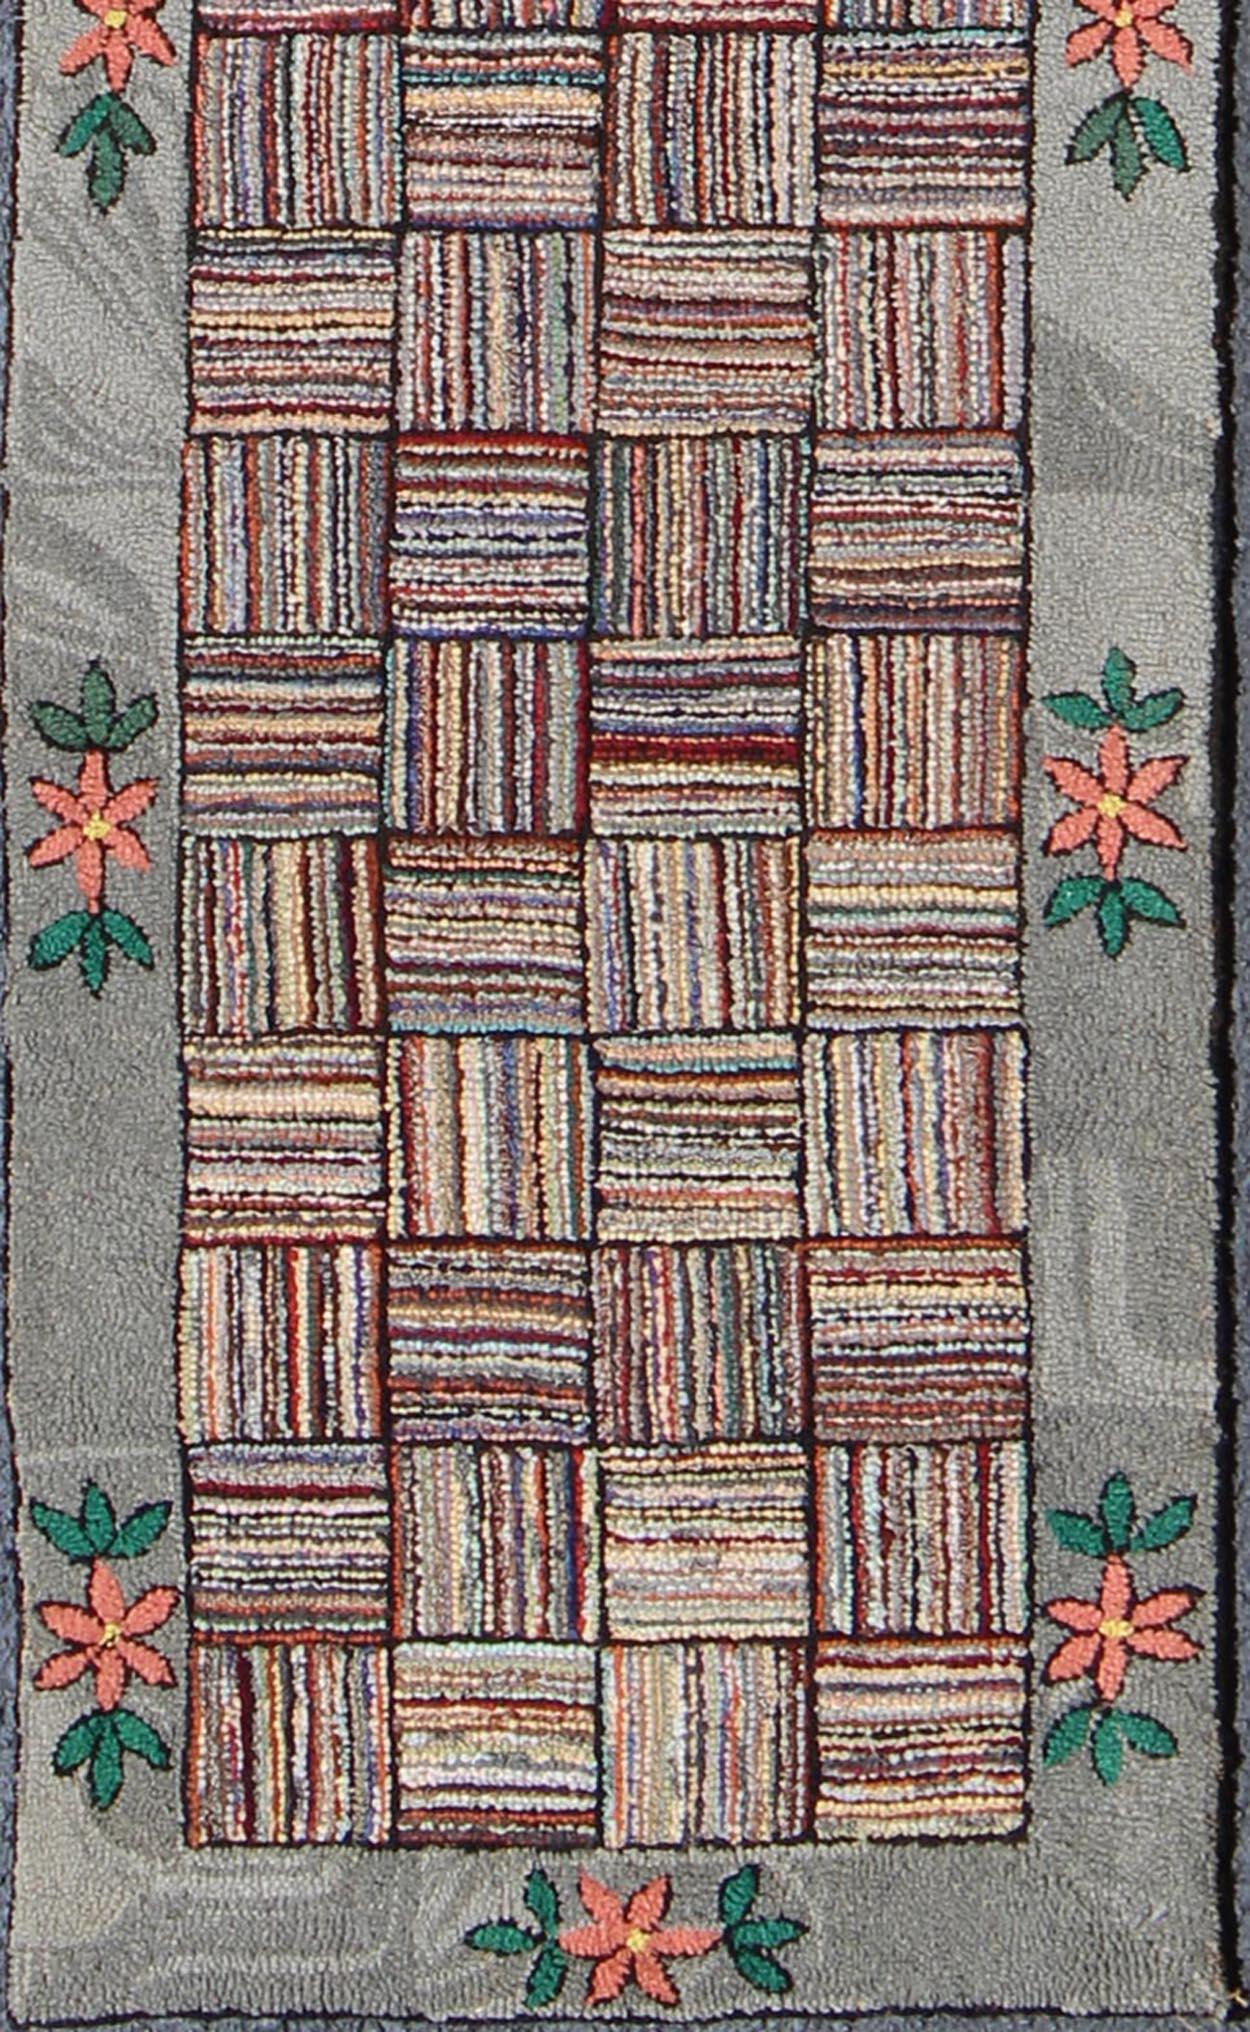 Antique American Hooked runner with colorful patchwork design, rug j10-1002, country of origin / type: United States / Hooked, circa 1920.

This vintage American Hooked rug depicts a beautiful patchwork design in a variety of colors. The entirety